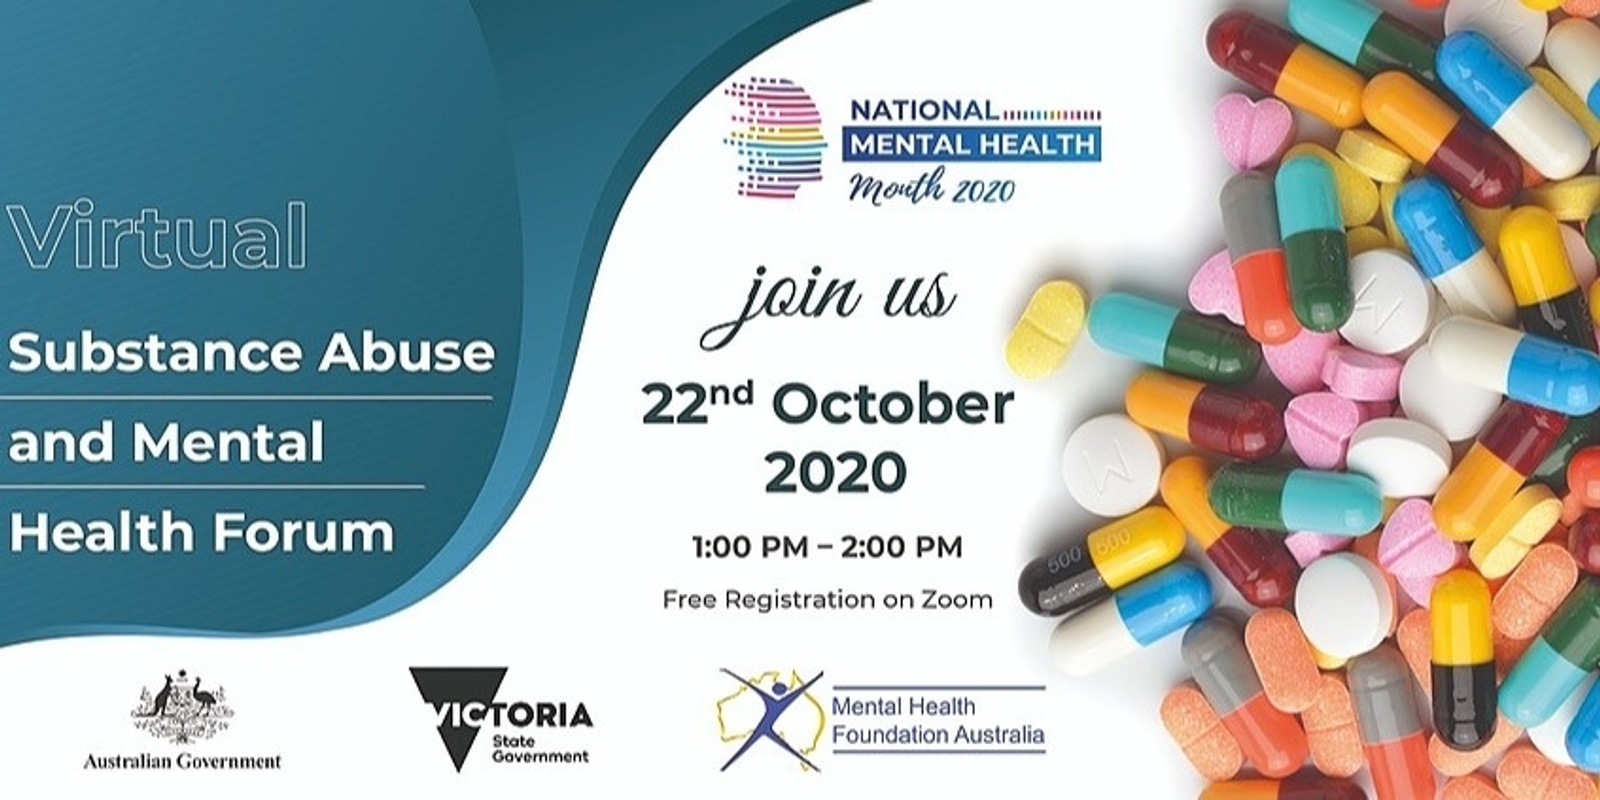 Banner image for Virtual Forum on Substance Abuse and Mental Health